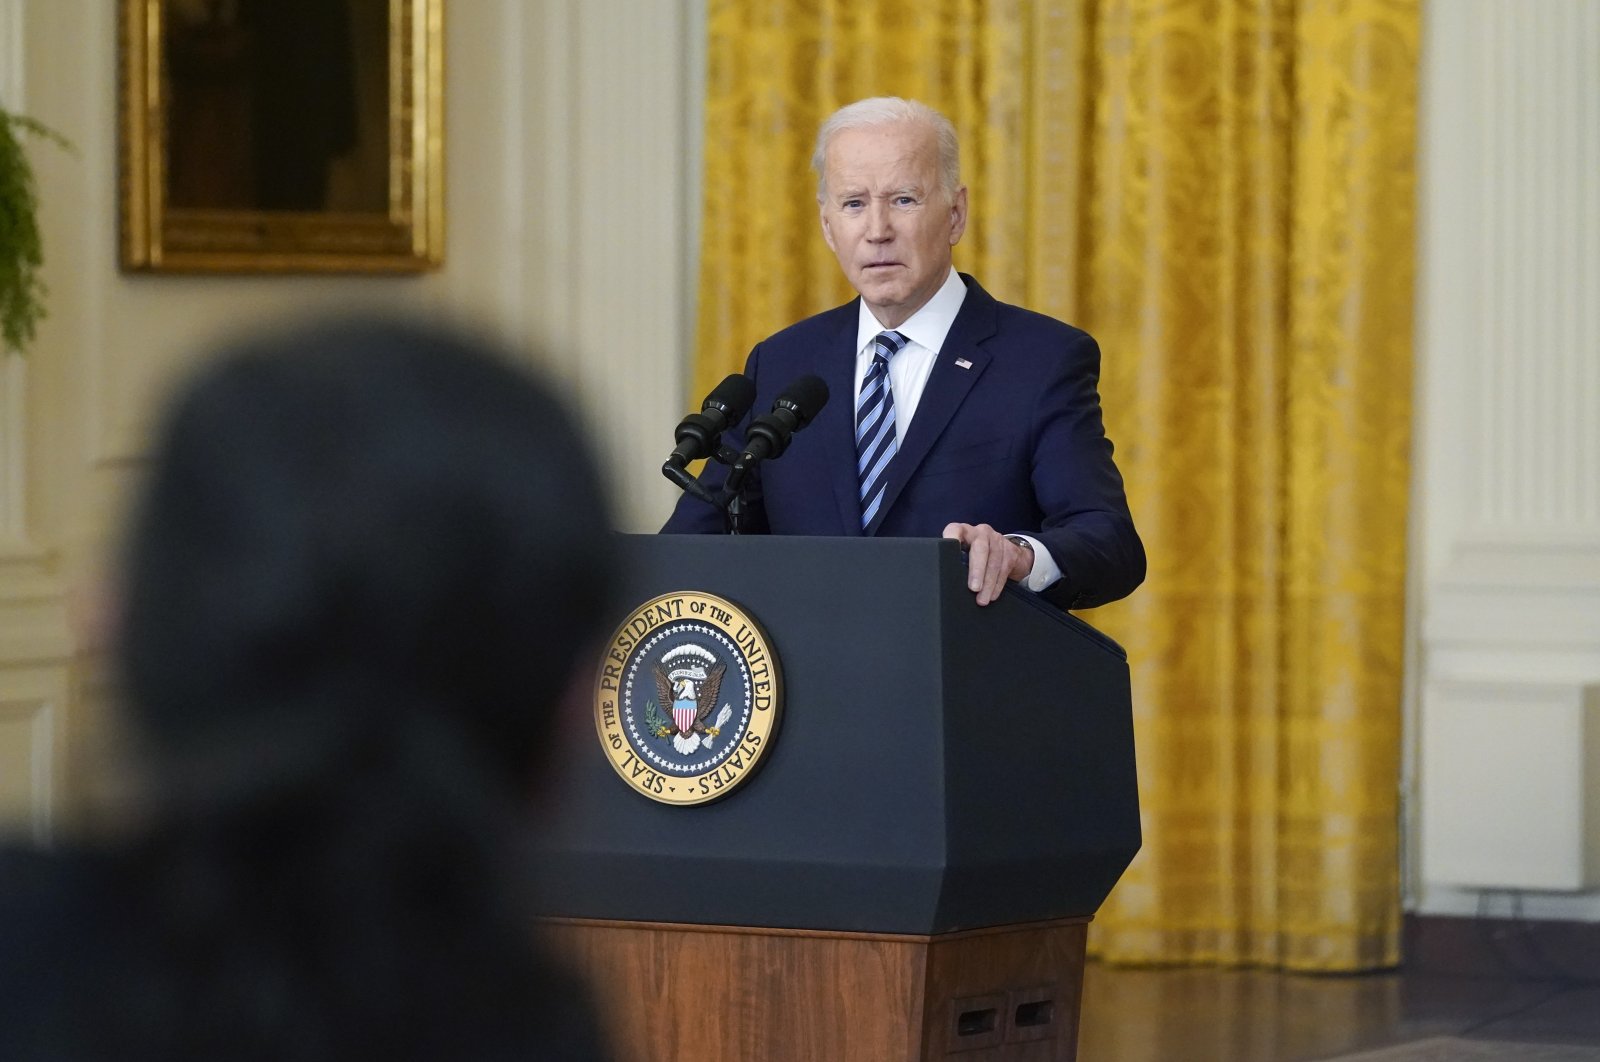 U.S. President Joe Biden listens to a question from a reporter while speaking about the Russian invasion of Ukraine in the East Room of the White House, Washington, Feb. 24, 2022. (AP Photo)